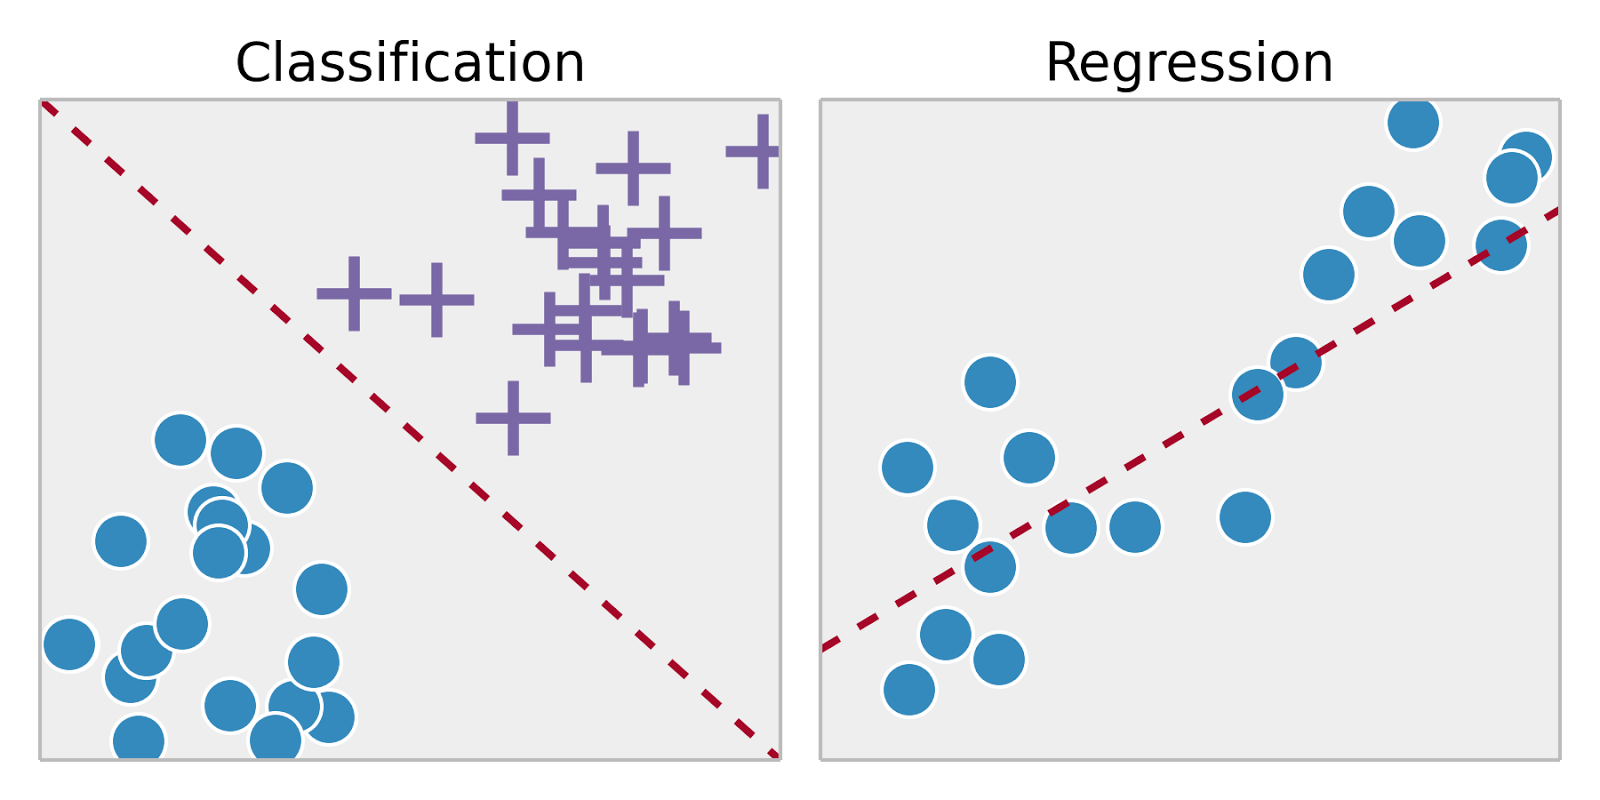 ep:labs:3._classification_vs_regression.png